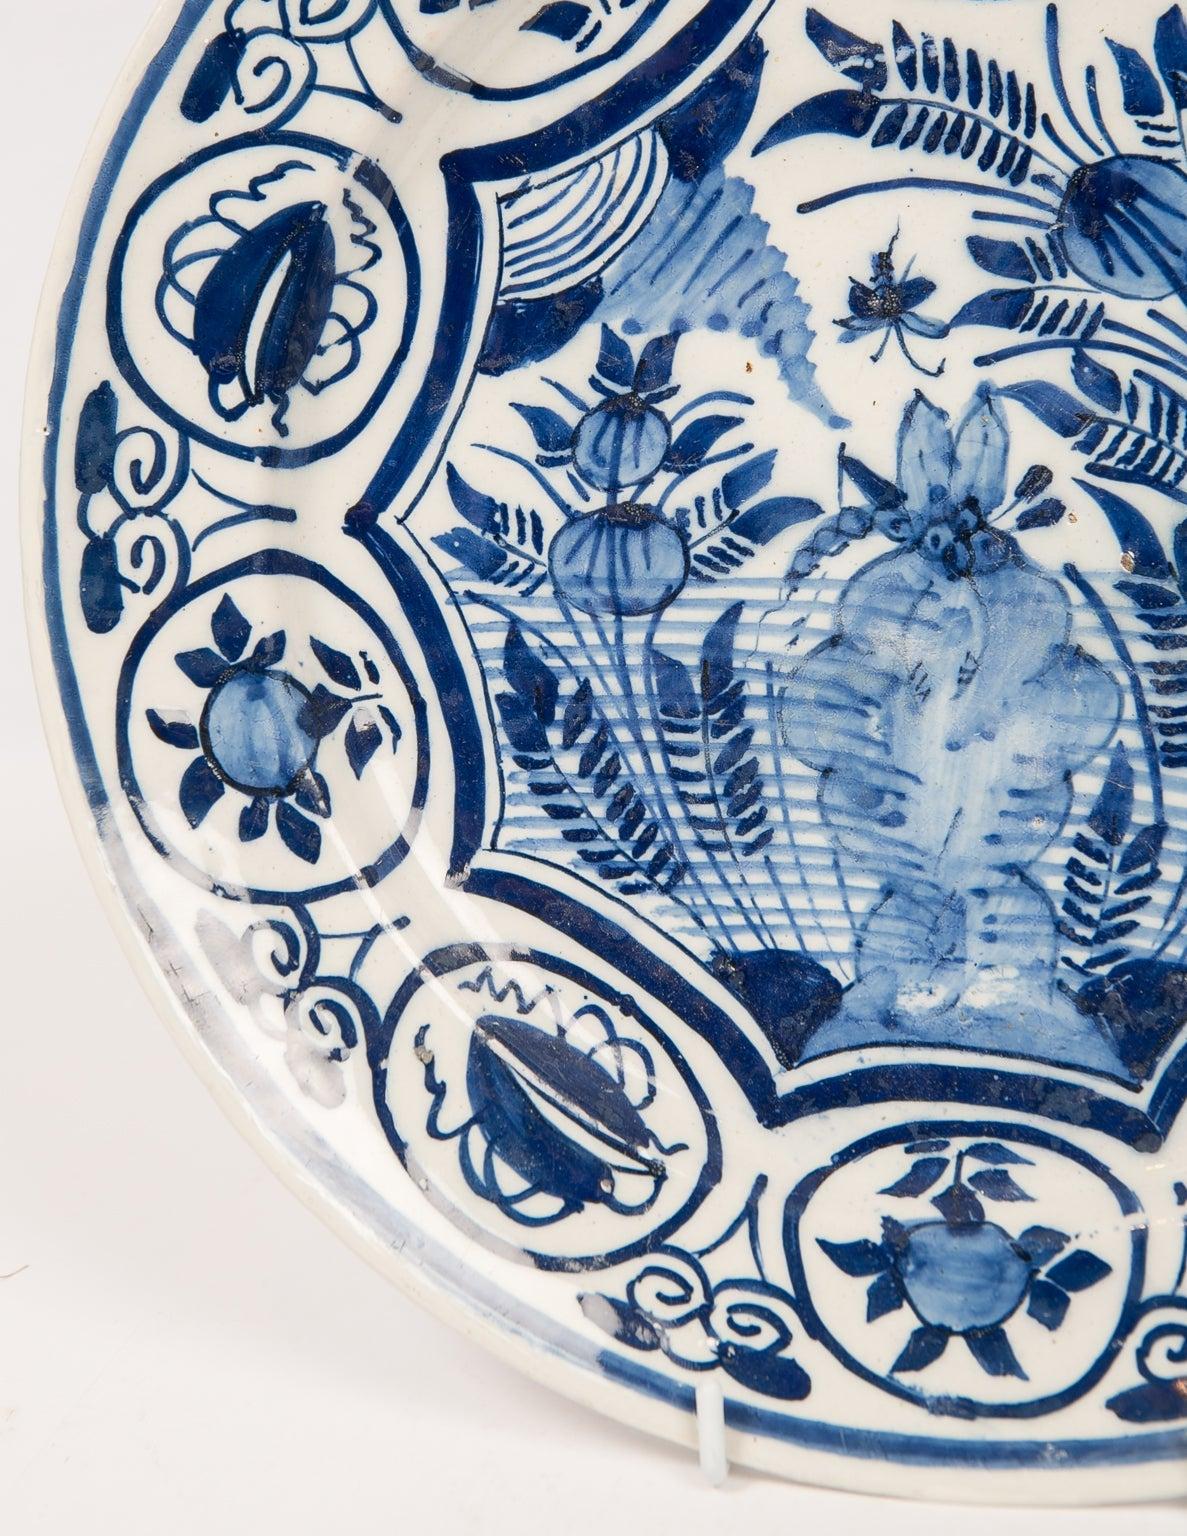 Eleven blue and white delft chargers hand painted and dating from the mid-18th century to circa 1800.
Each charger is hand painted in a medium tone of cobalt blue. This medium tone of cobalt coloring allows the chargers to work well together as a